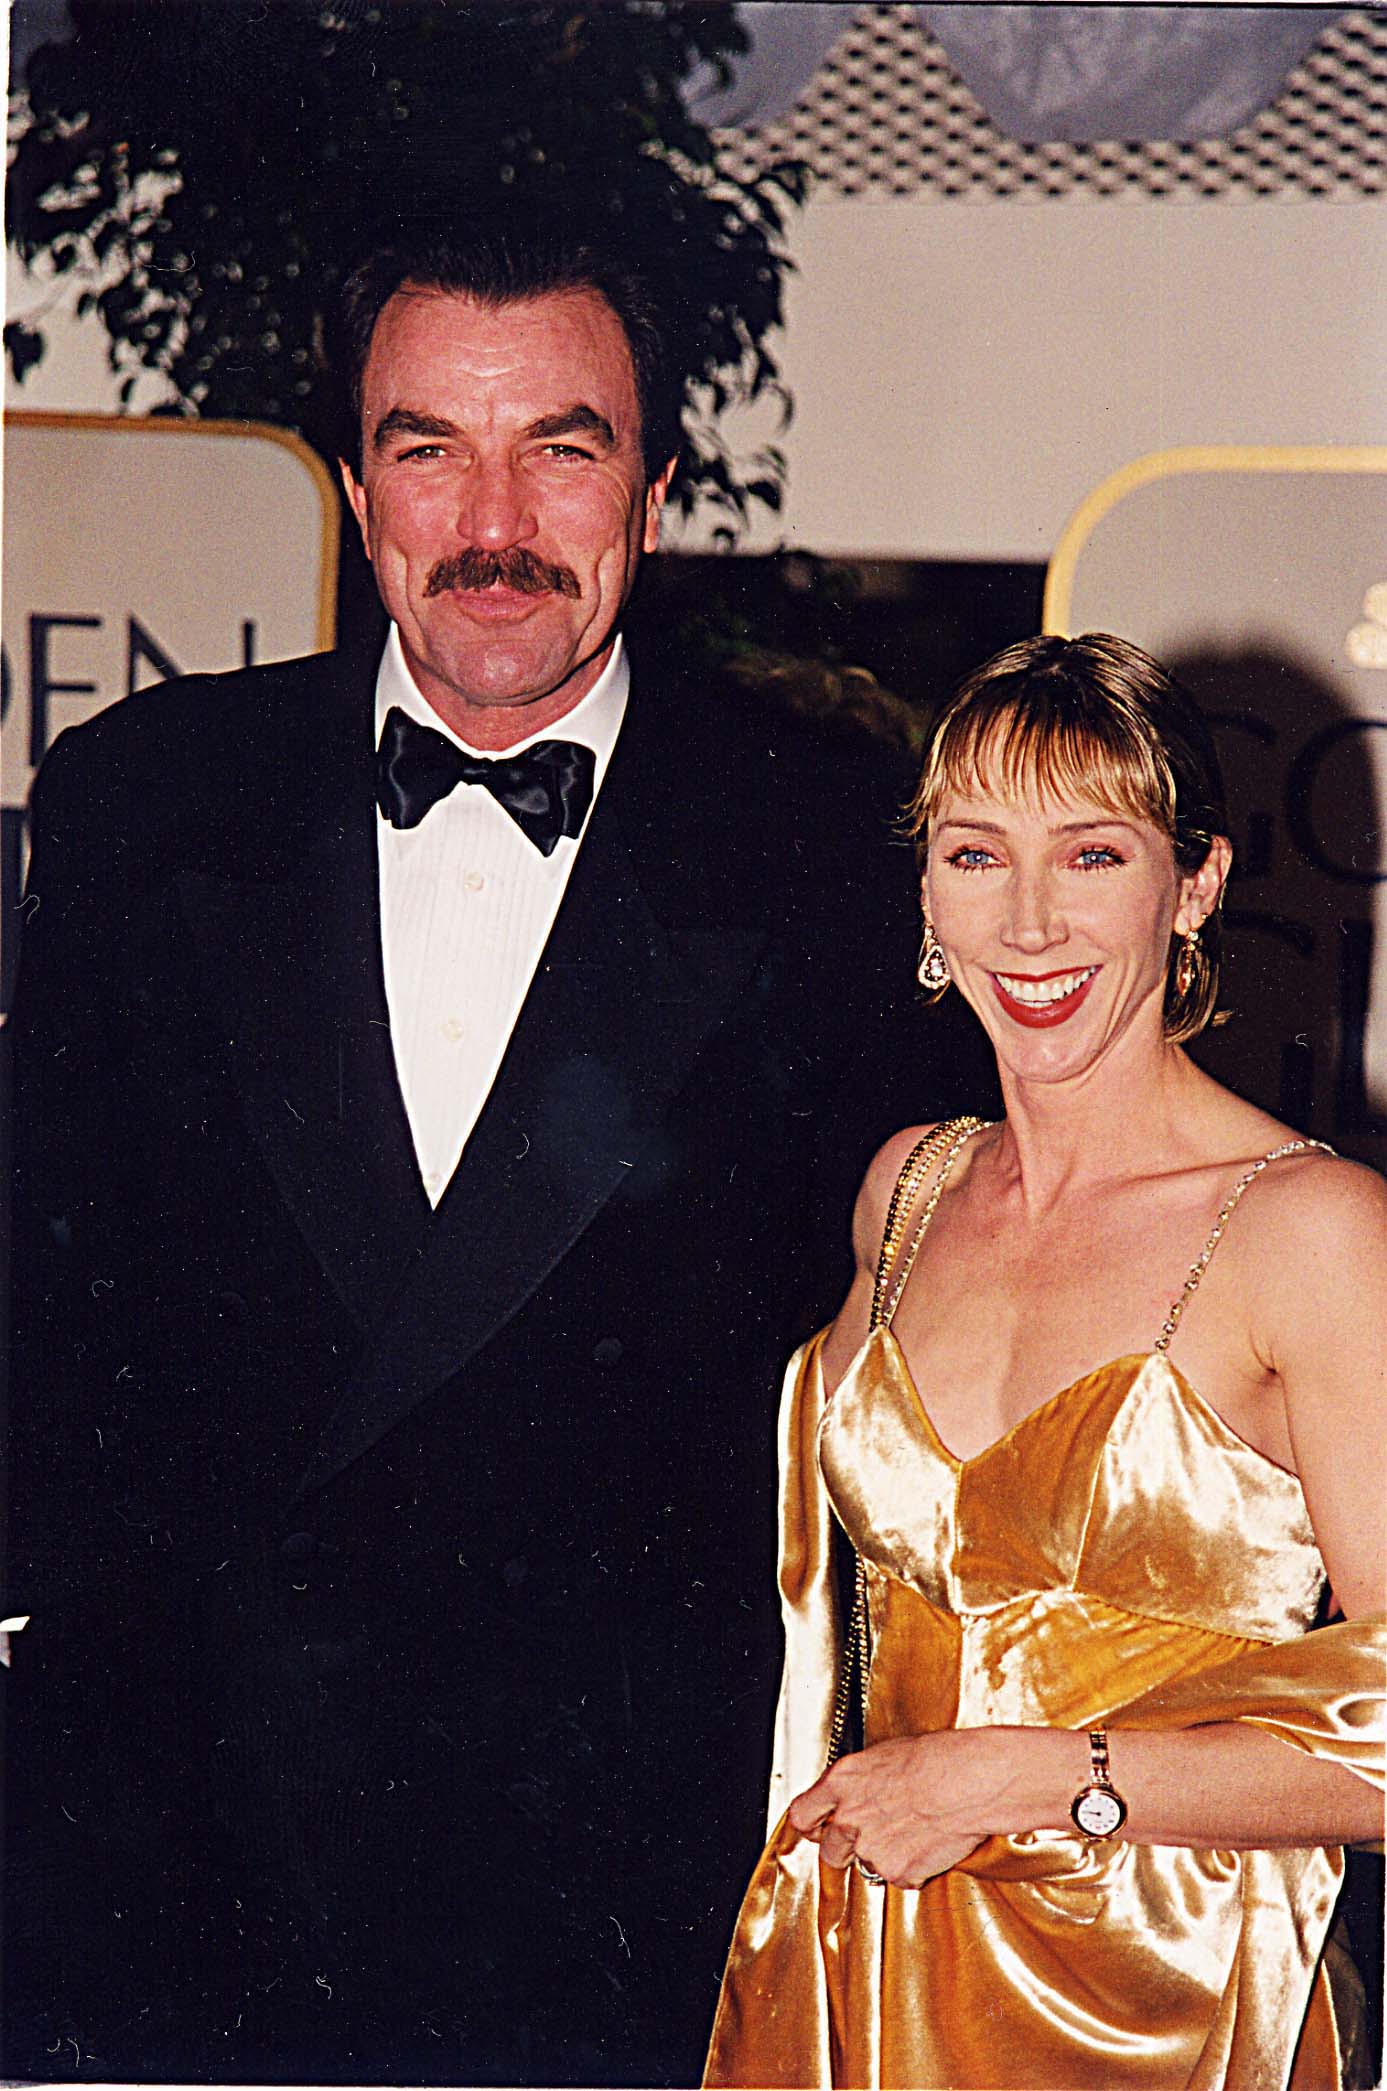 Tom Selleck and Jillie Mack during the Golden Globe Awards in Los Angeles, California, on September 9, 1999. | Source: Getty Images